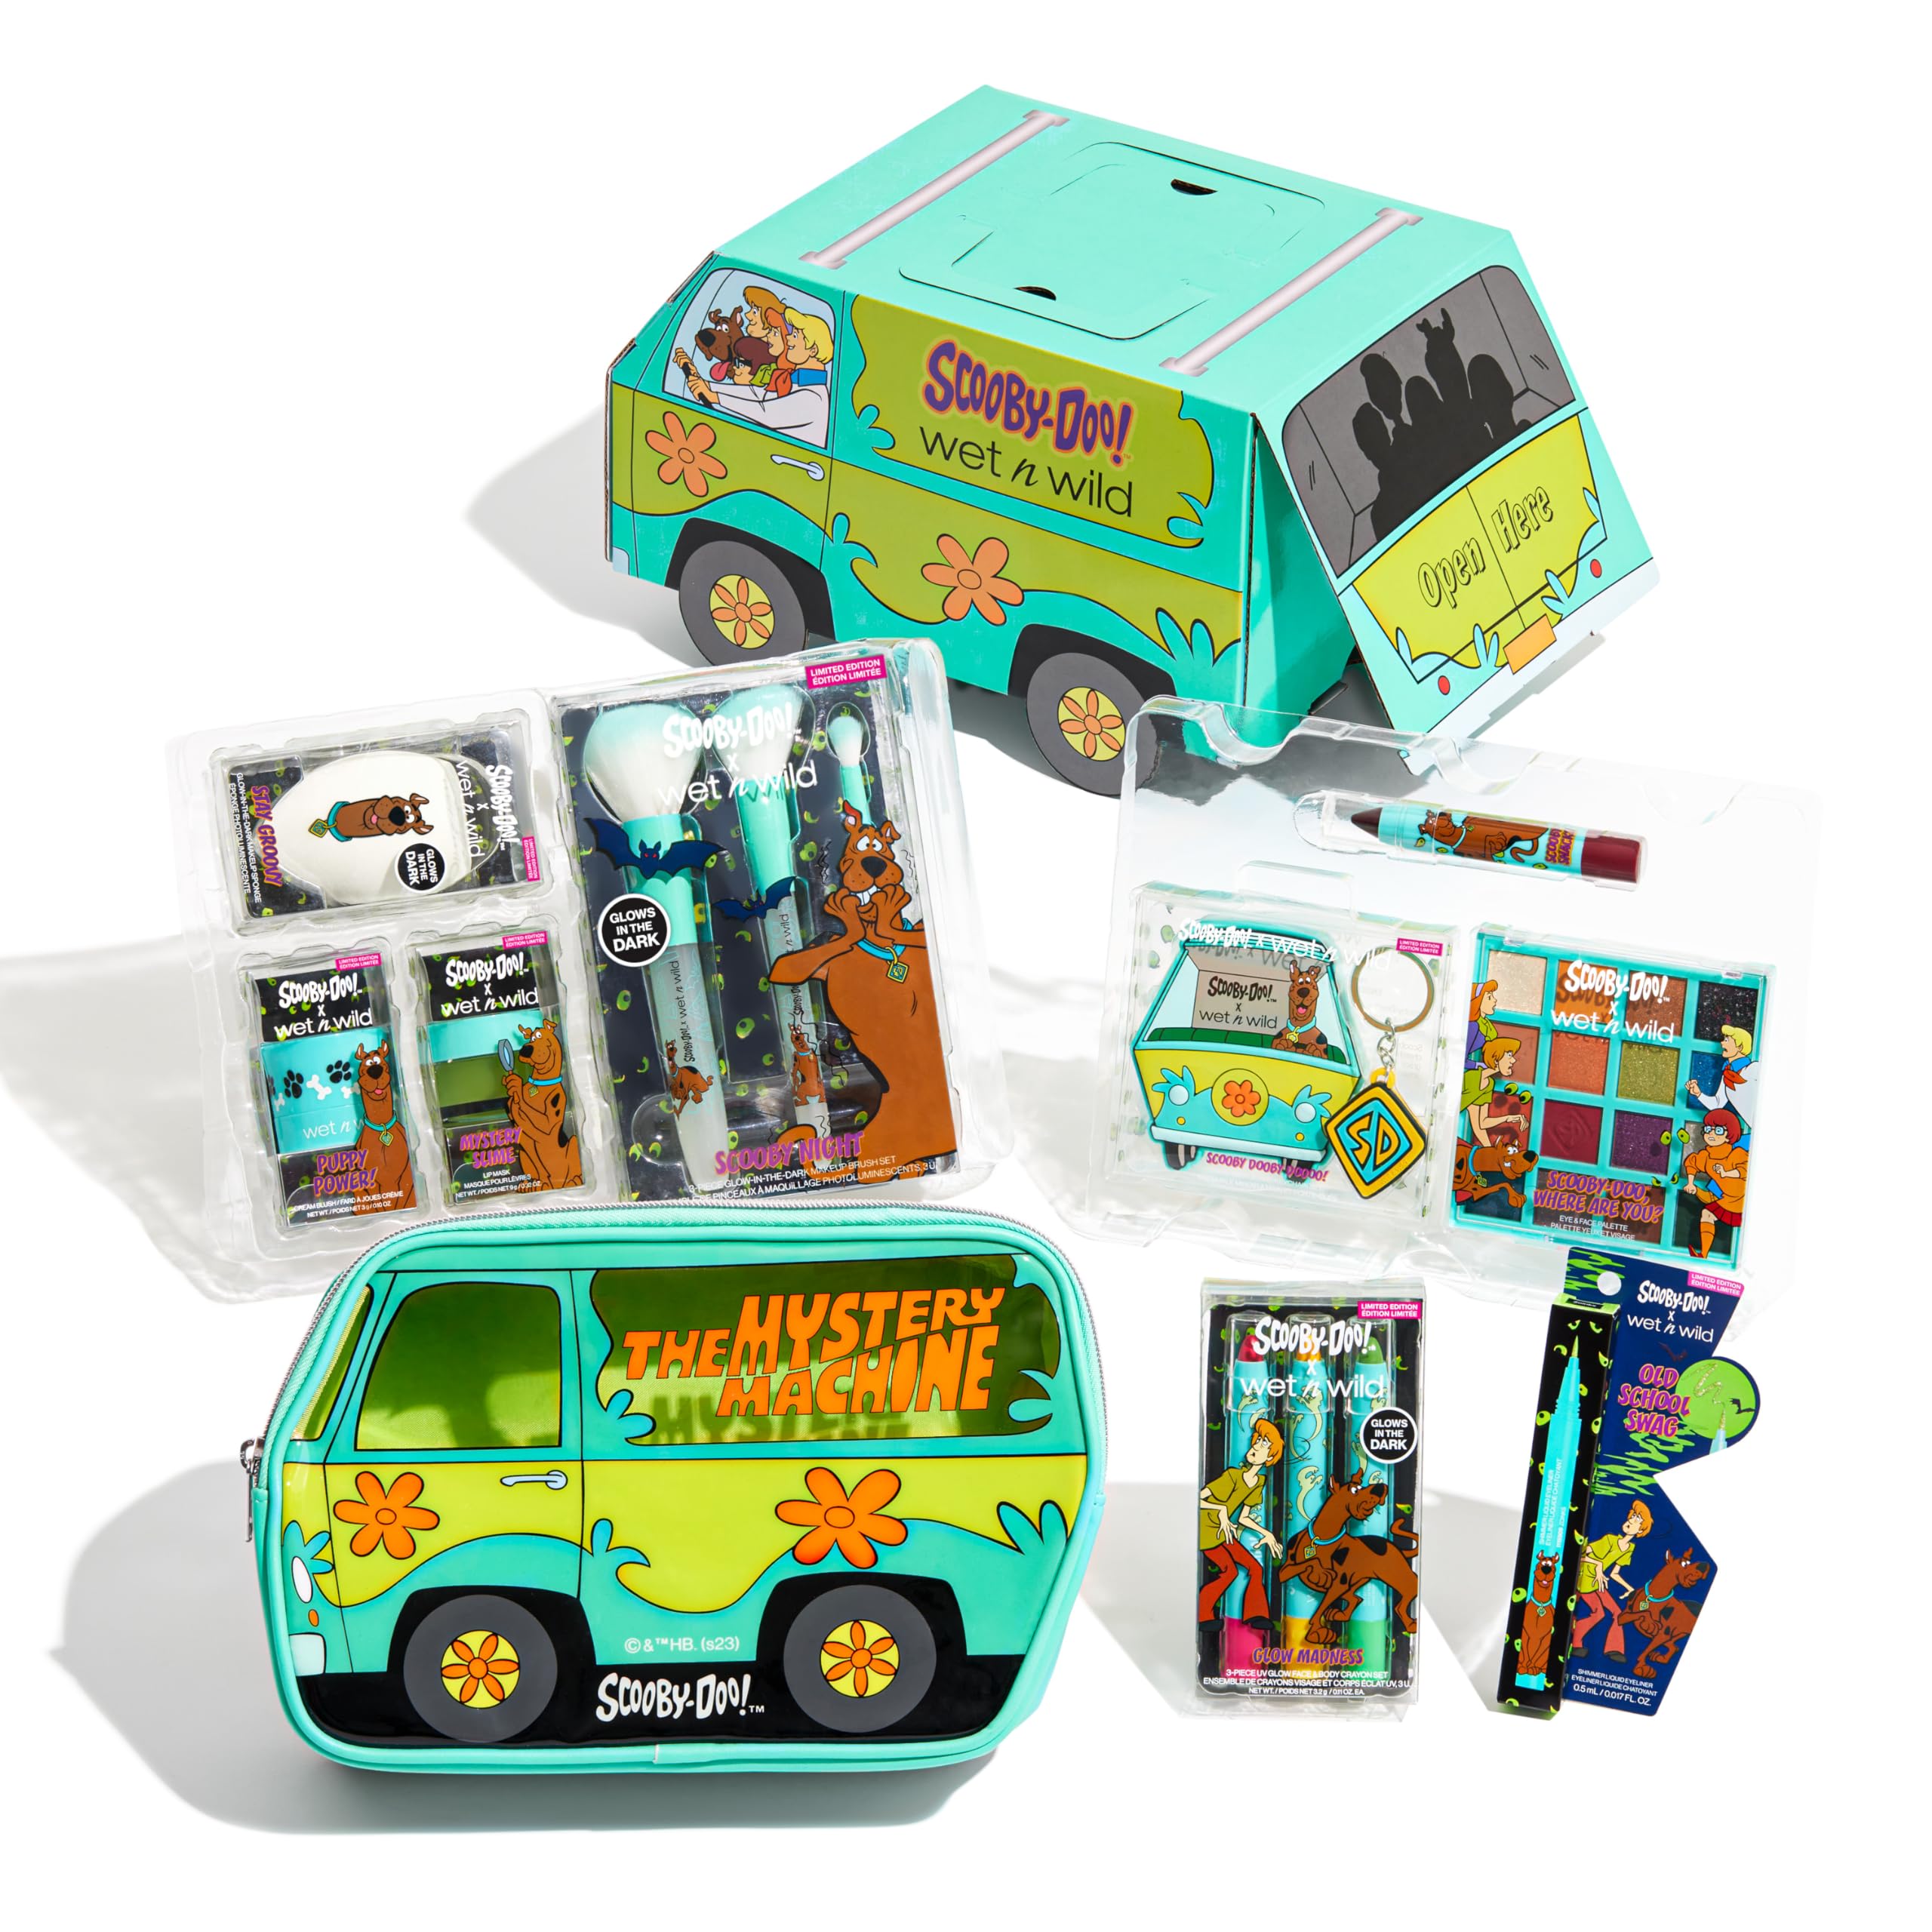 wet n wild Scooby Doo Limited Edition PR Box- Makeup Set with Brushes, and Palettes